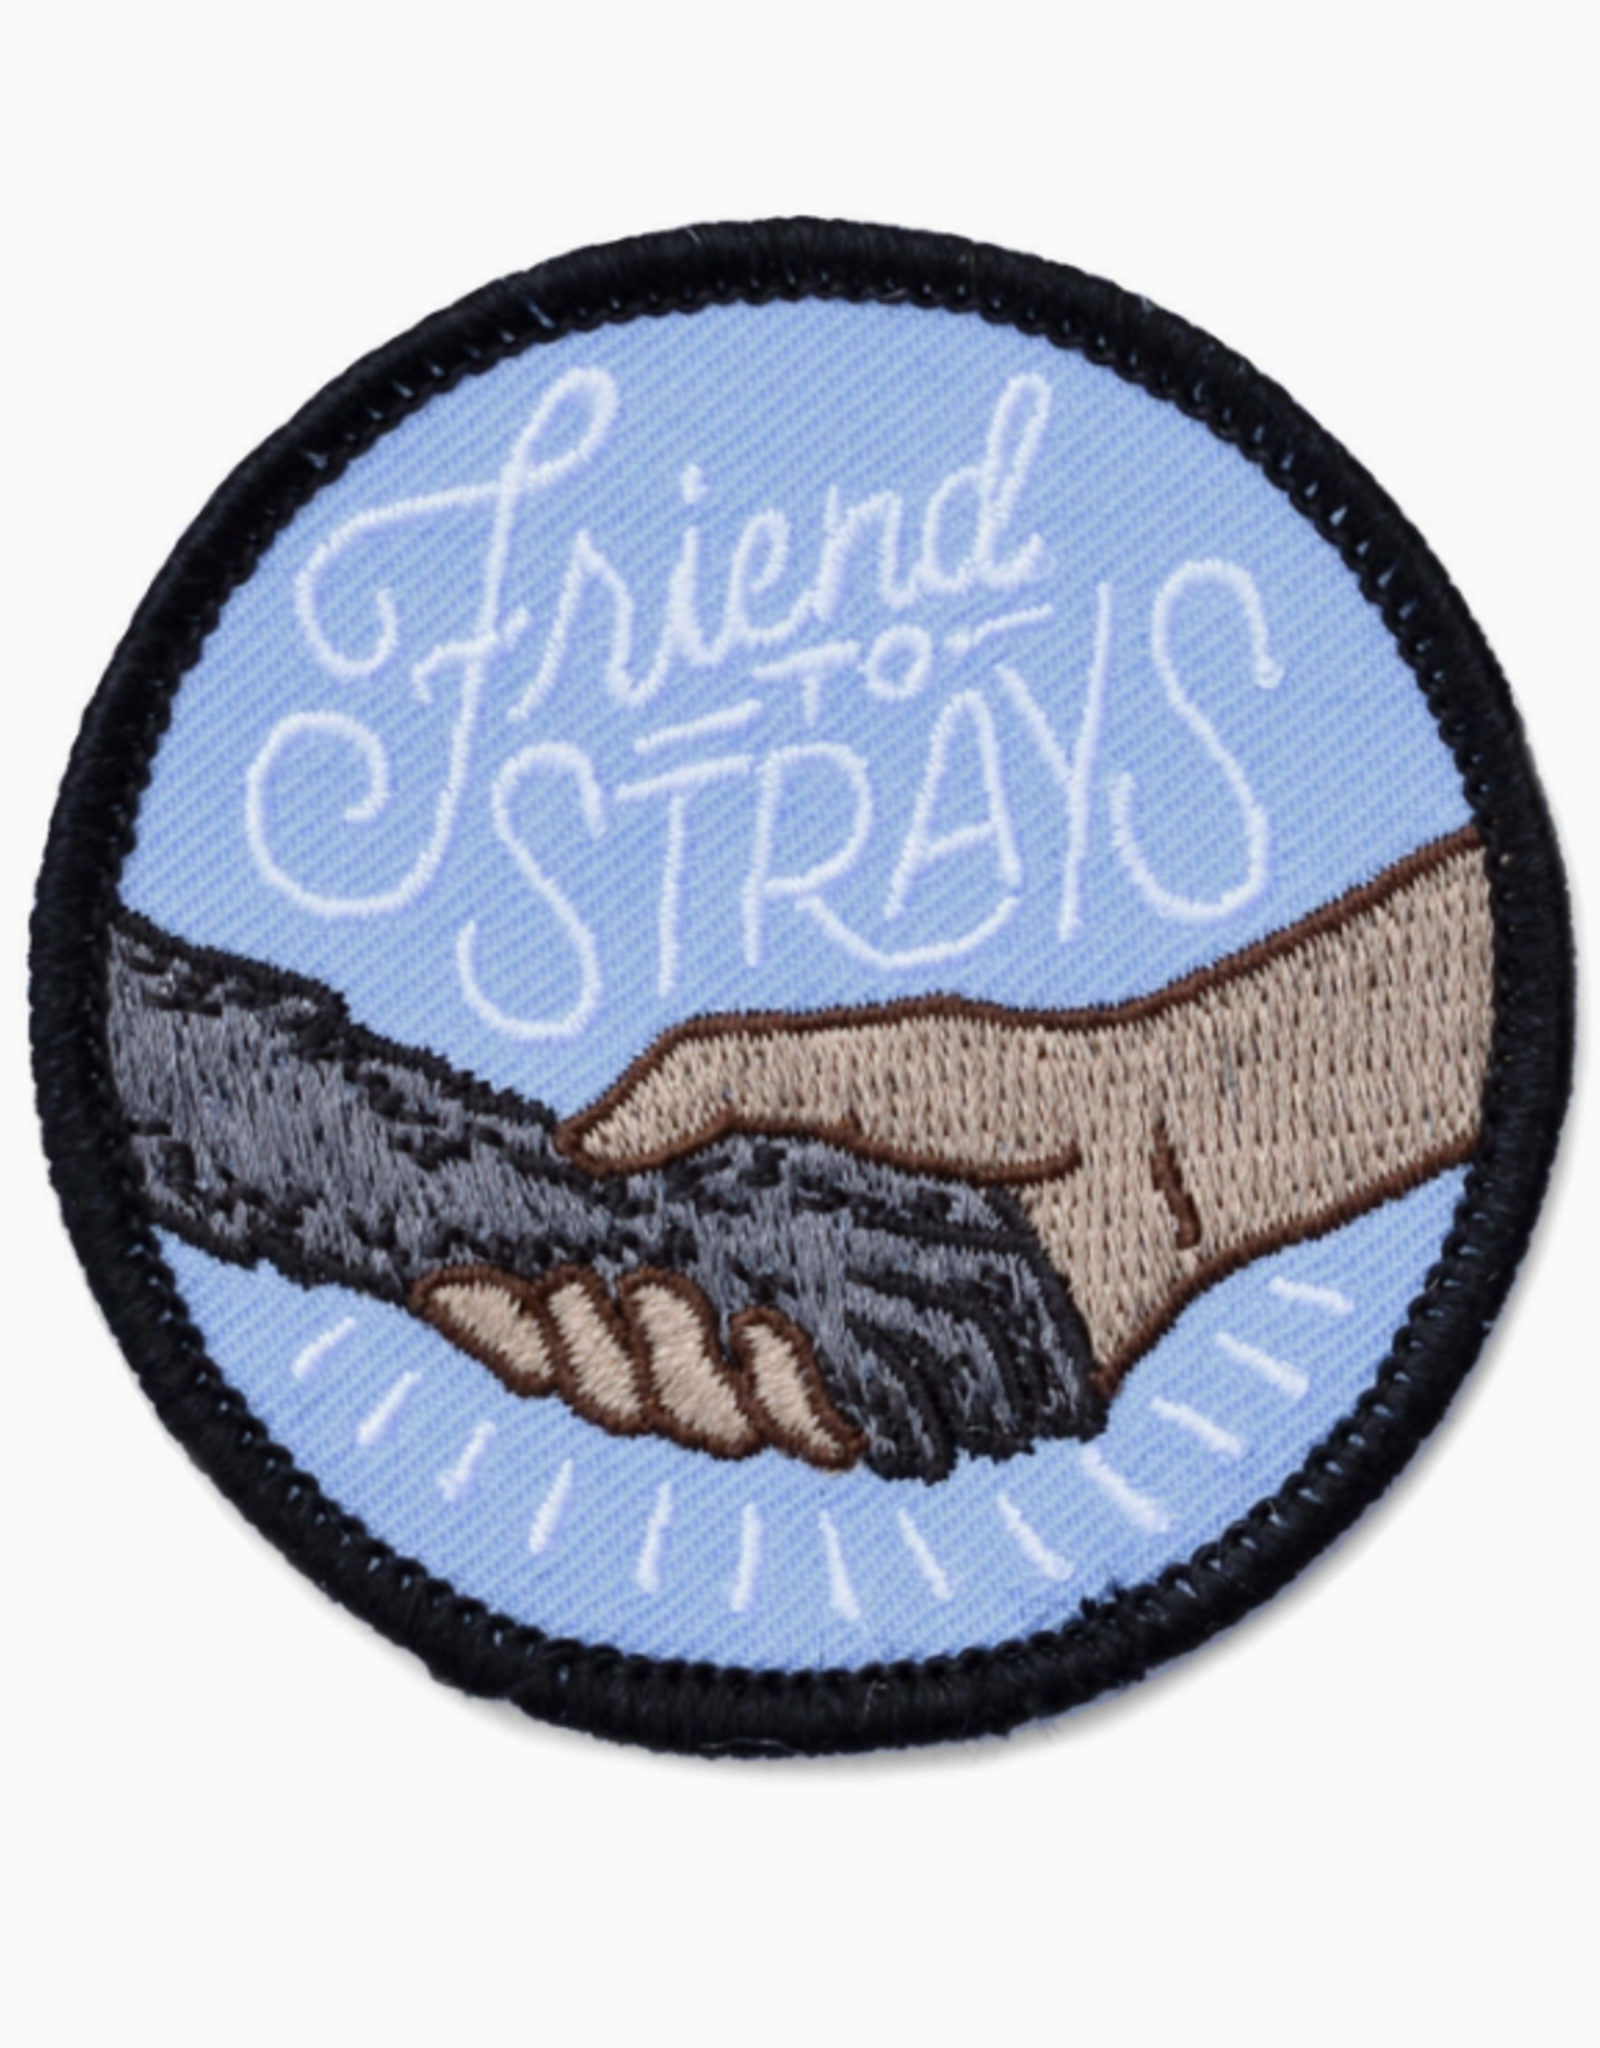 Frog and Toad Press Patch - Friend to Strays